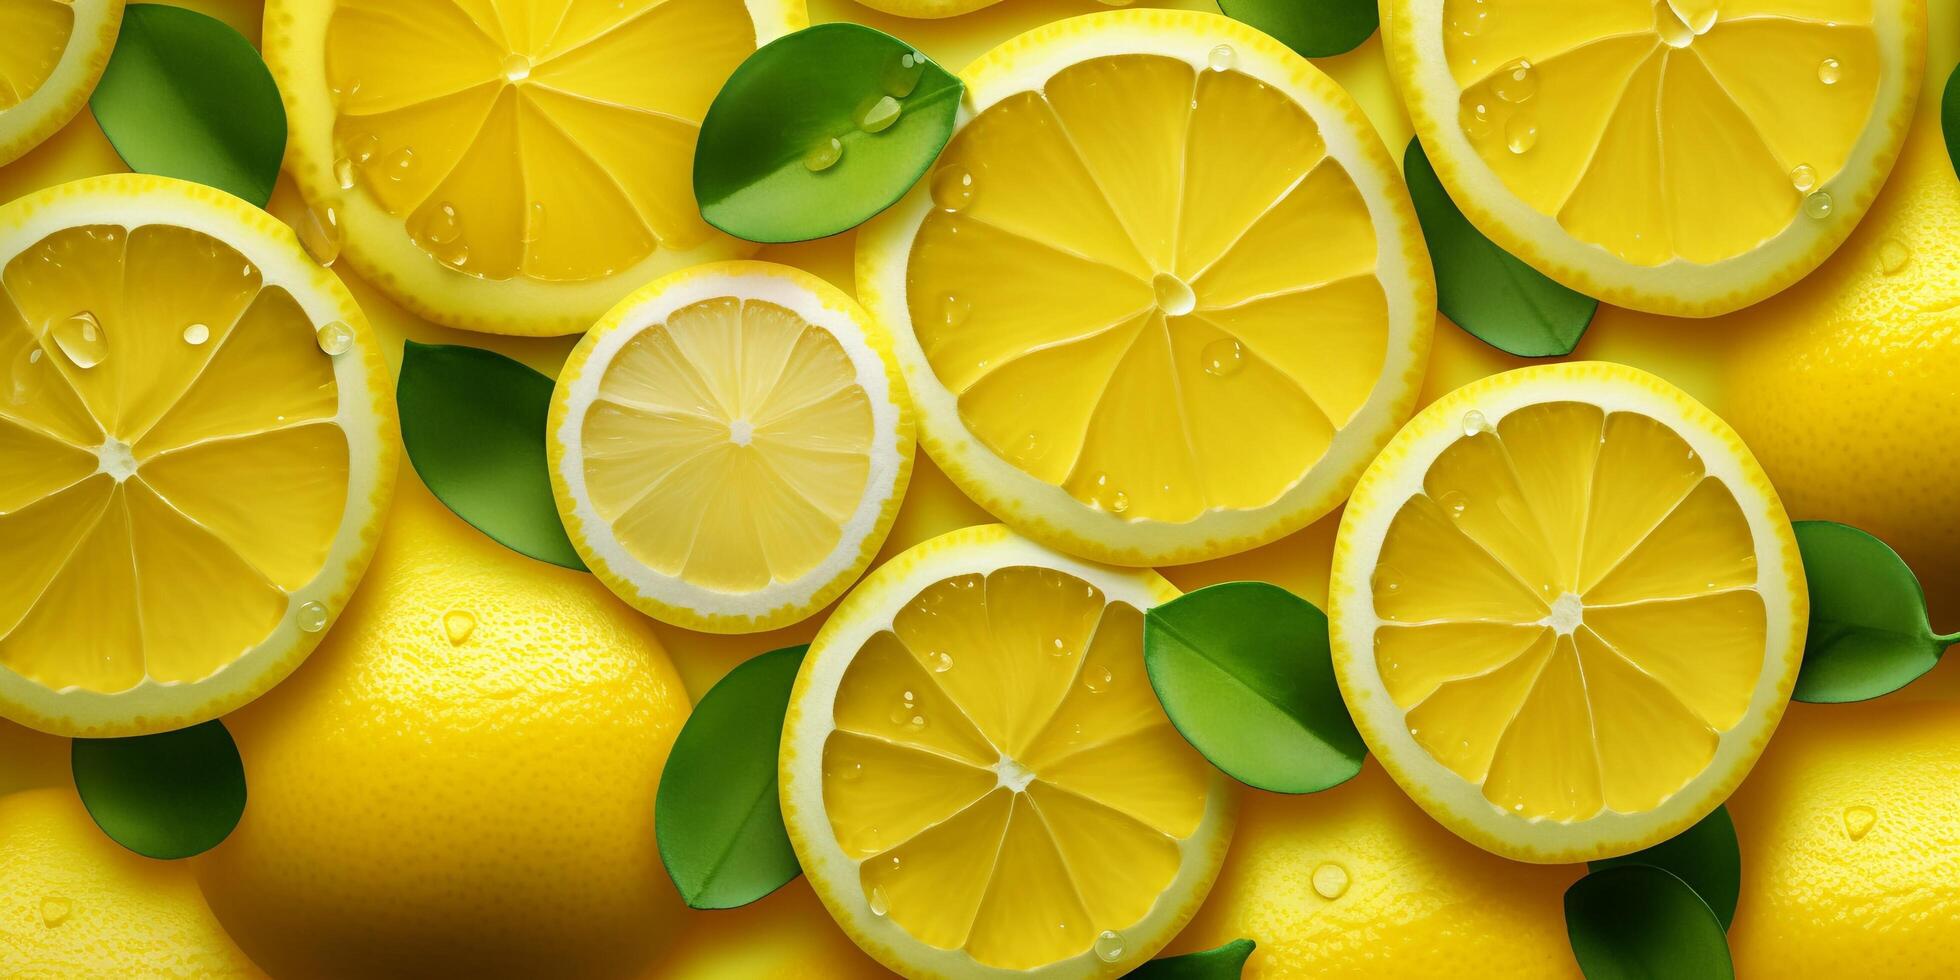 Lemon and lemon slices with leaves on yellow background, top view with . photo